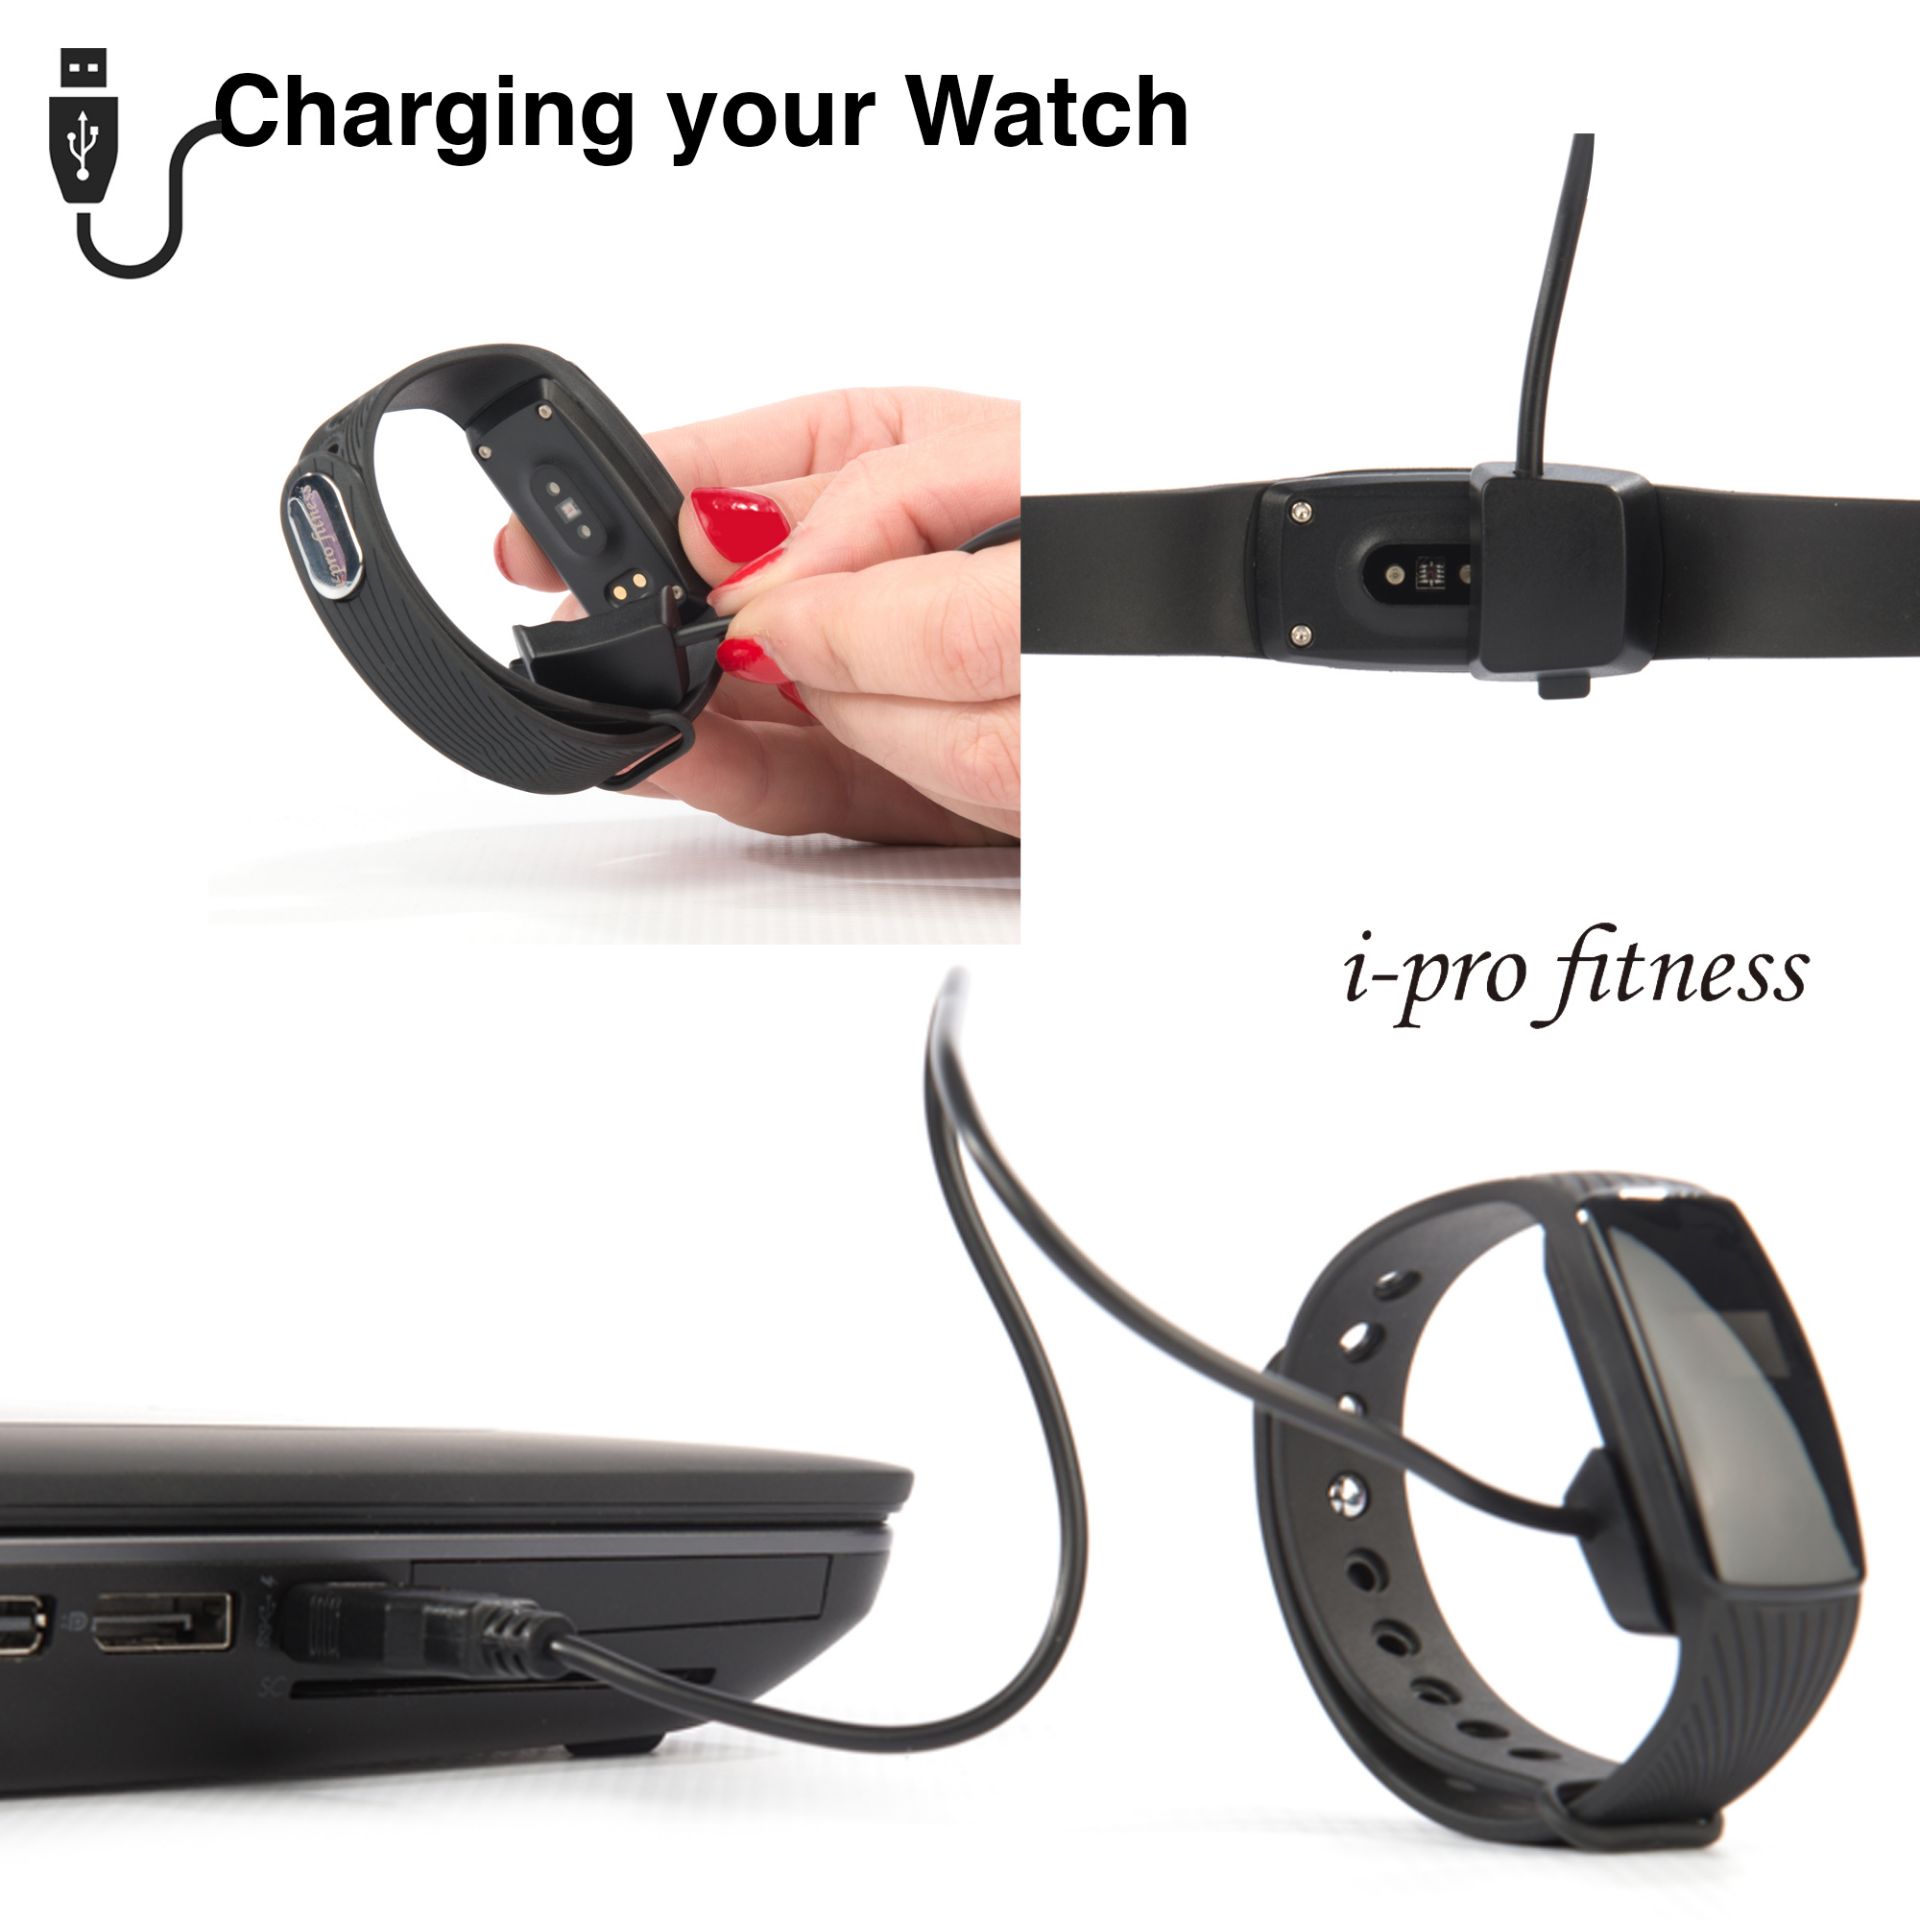 I-Pro Id107 Waterproof Fitness Tracker With Heart Rate Monitor, Sleep Tracker App And Calorie - Image 5 of 6